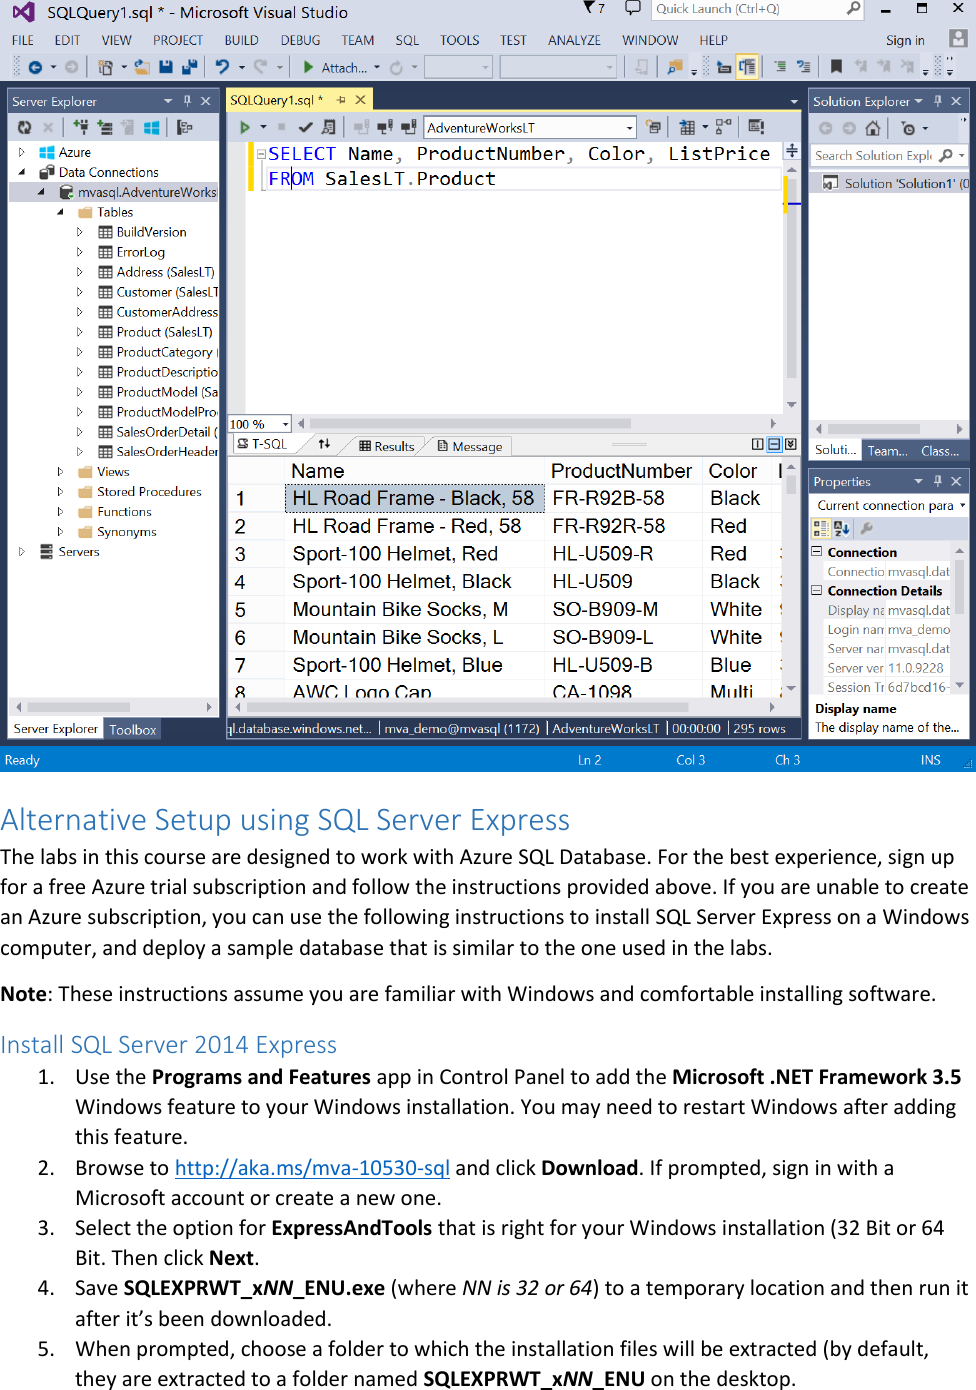 Page 9 of 11 - Getting Started With Transact-SQL Labs MVA Setup Guide